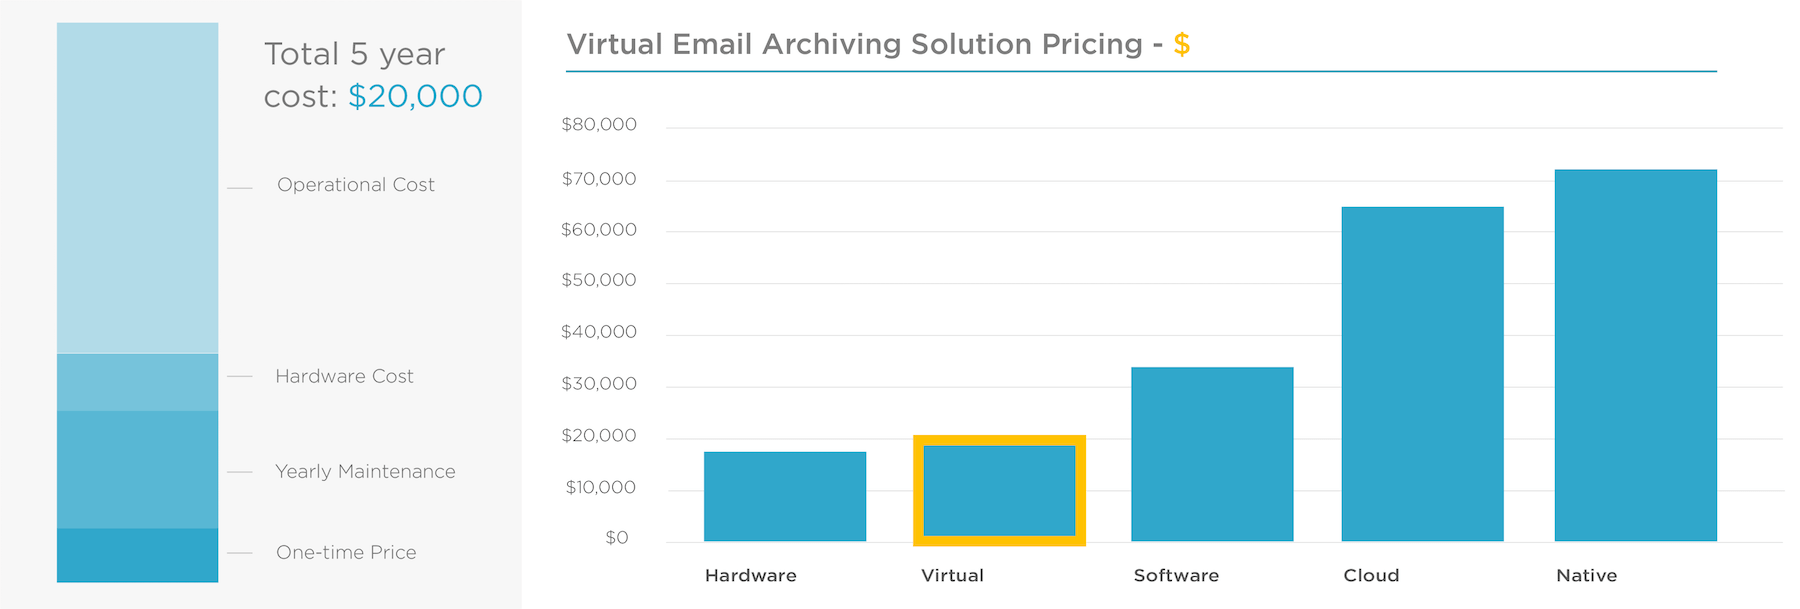 Virtual Email Archiving Solution Pricing